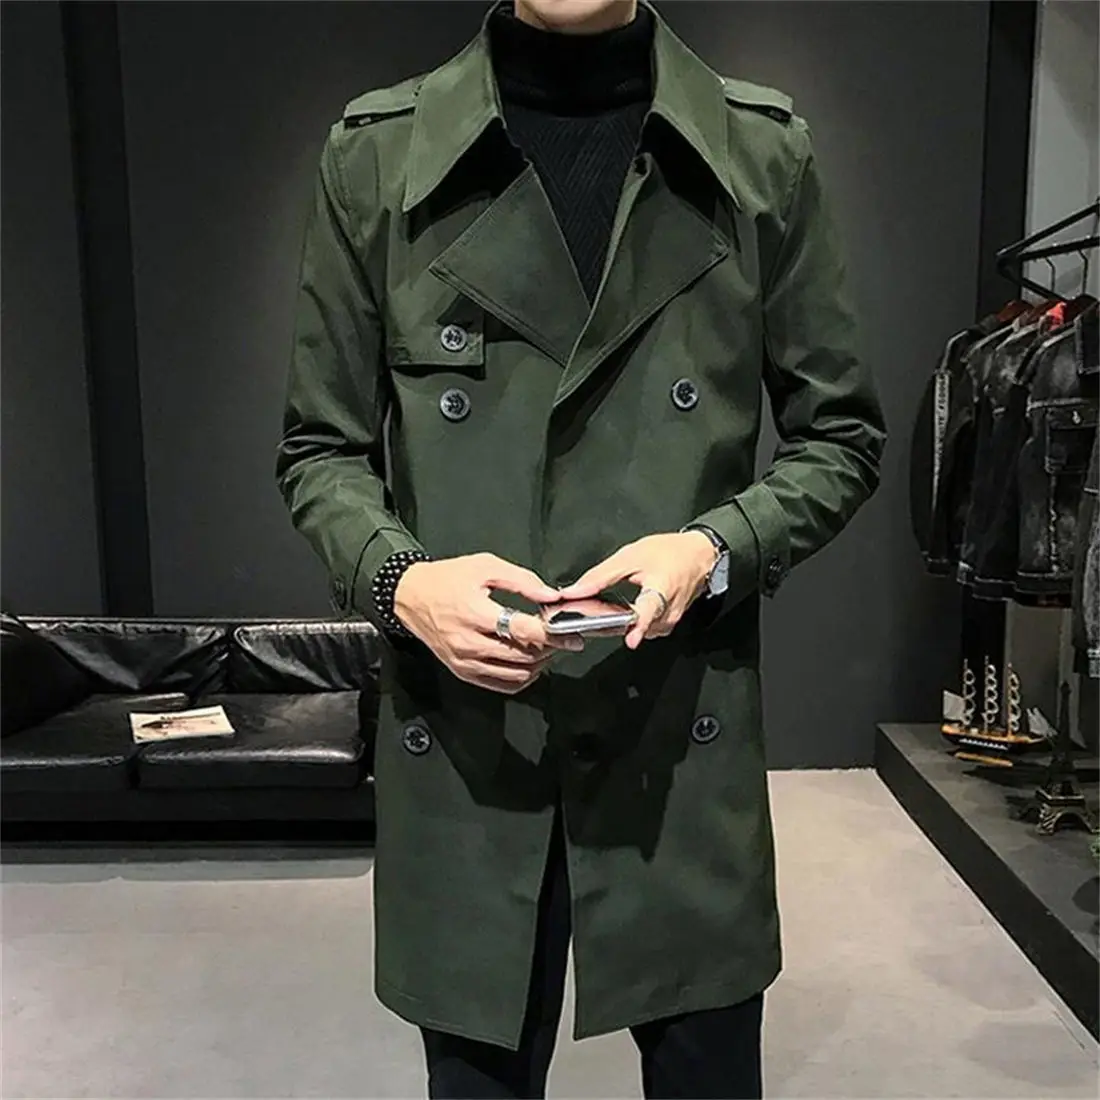 

2022 Autumn Winter Men's Jackets Double Breasted Medium-Long Trench Coat Male Solid Color Coats Fashion Windbreaker Outwears K53